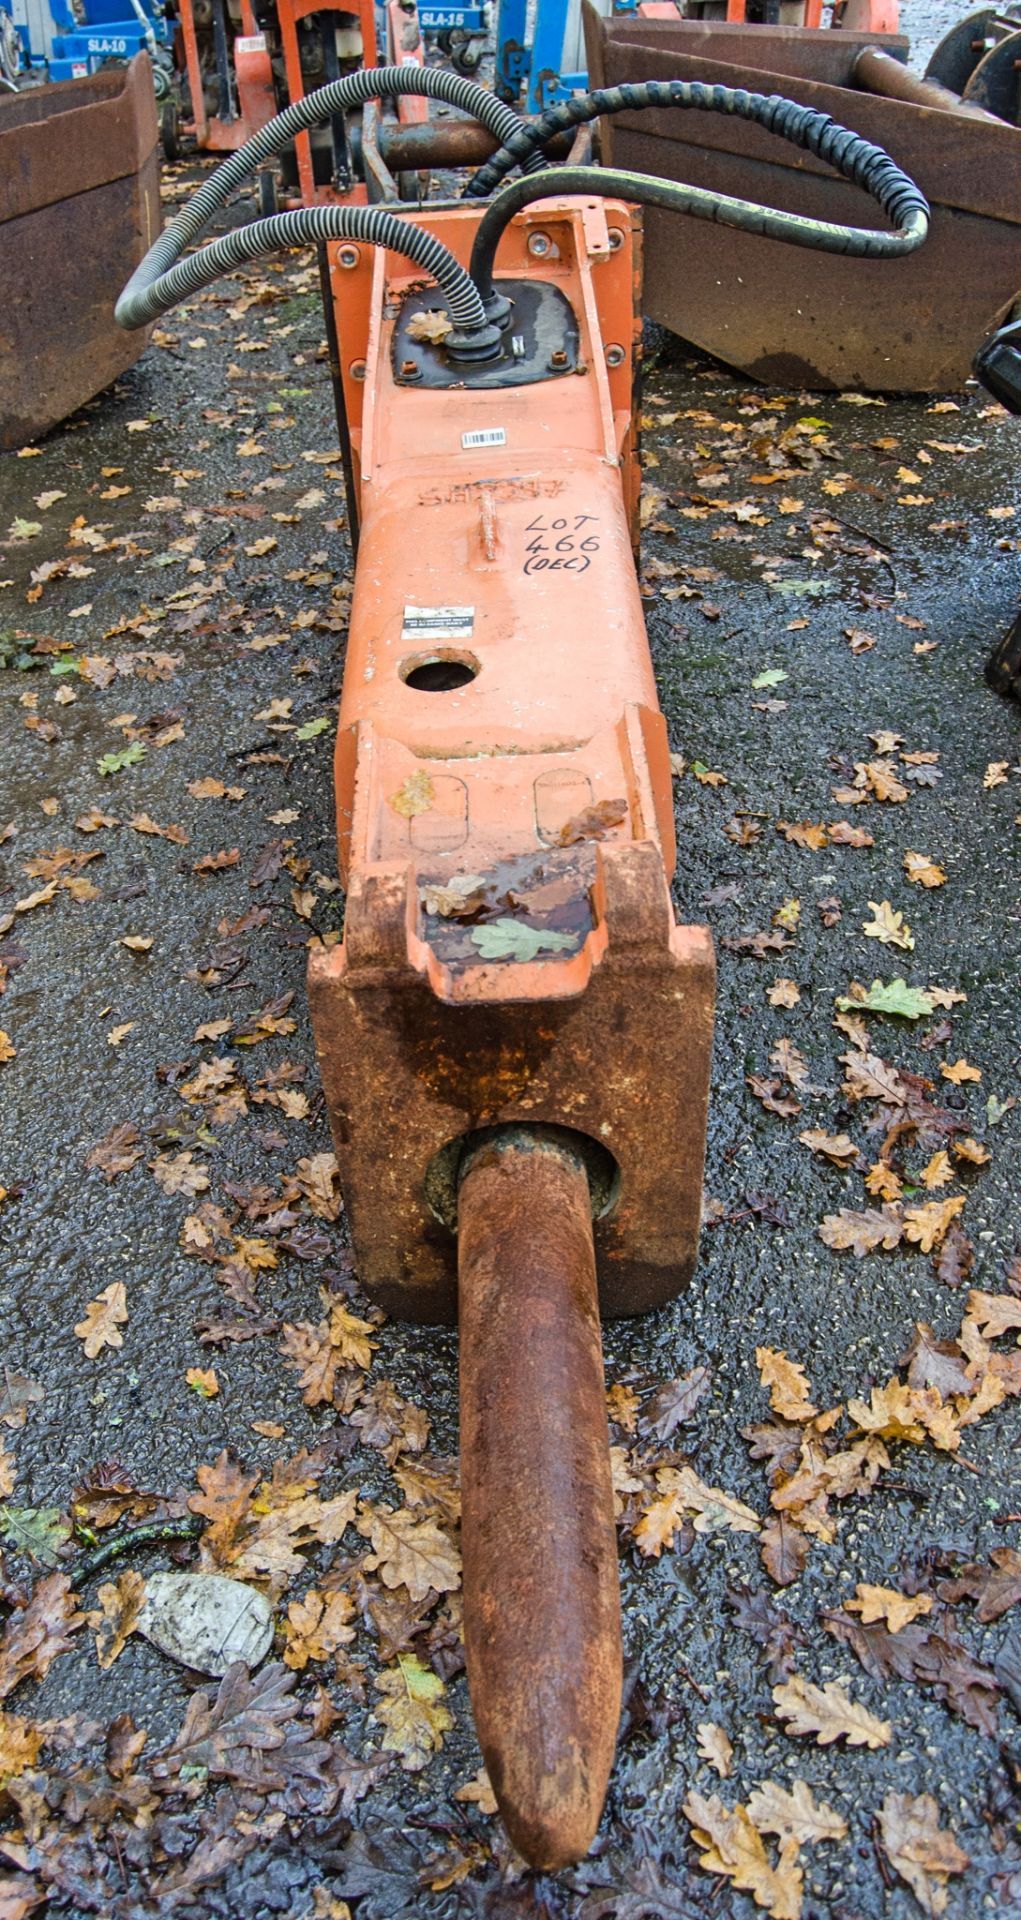 Construction Tools RX14L hydraulic breaker to suit 13-18 tonne excavator c/w headstock Pin diameter: - Image 4 of 5